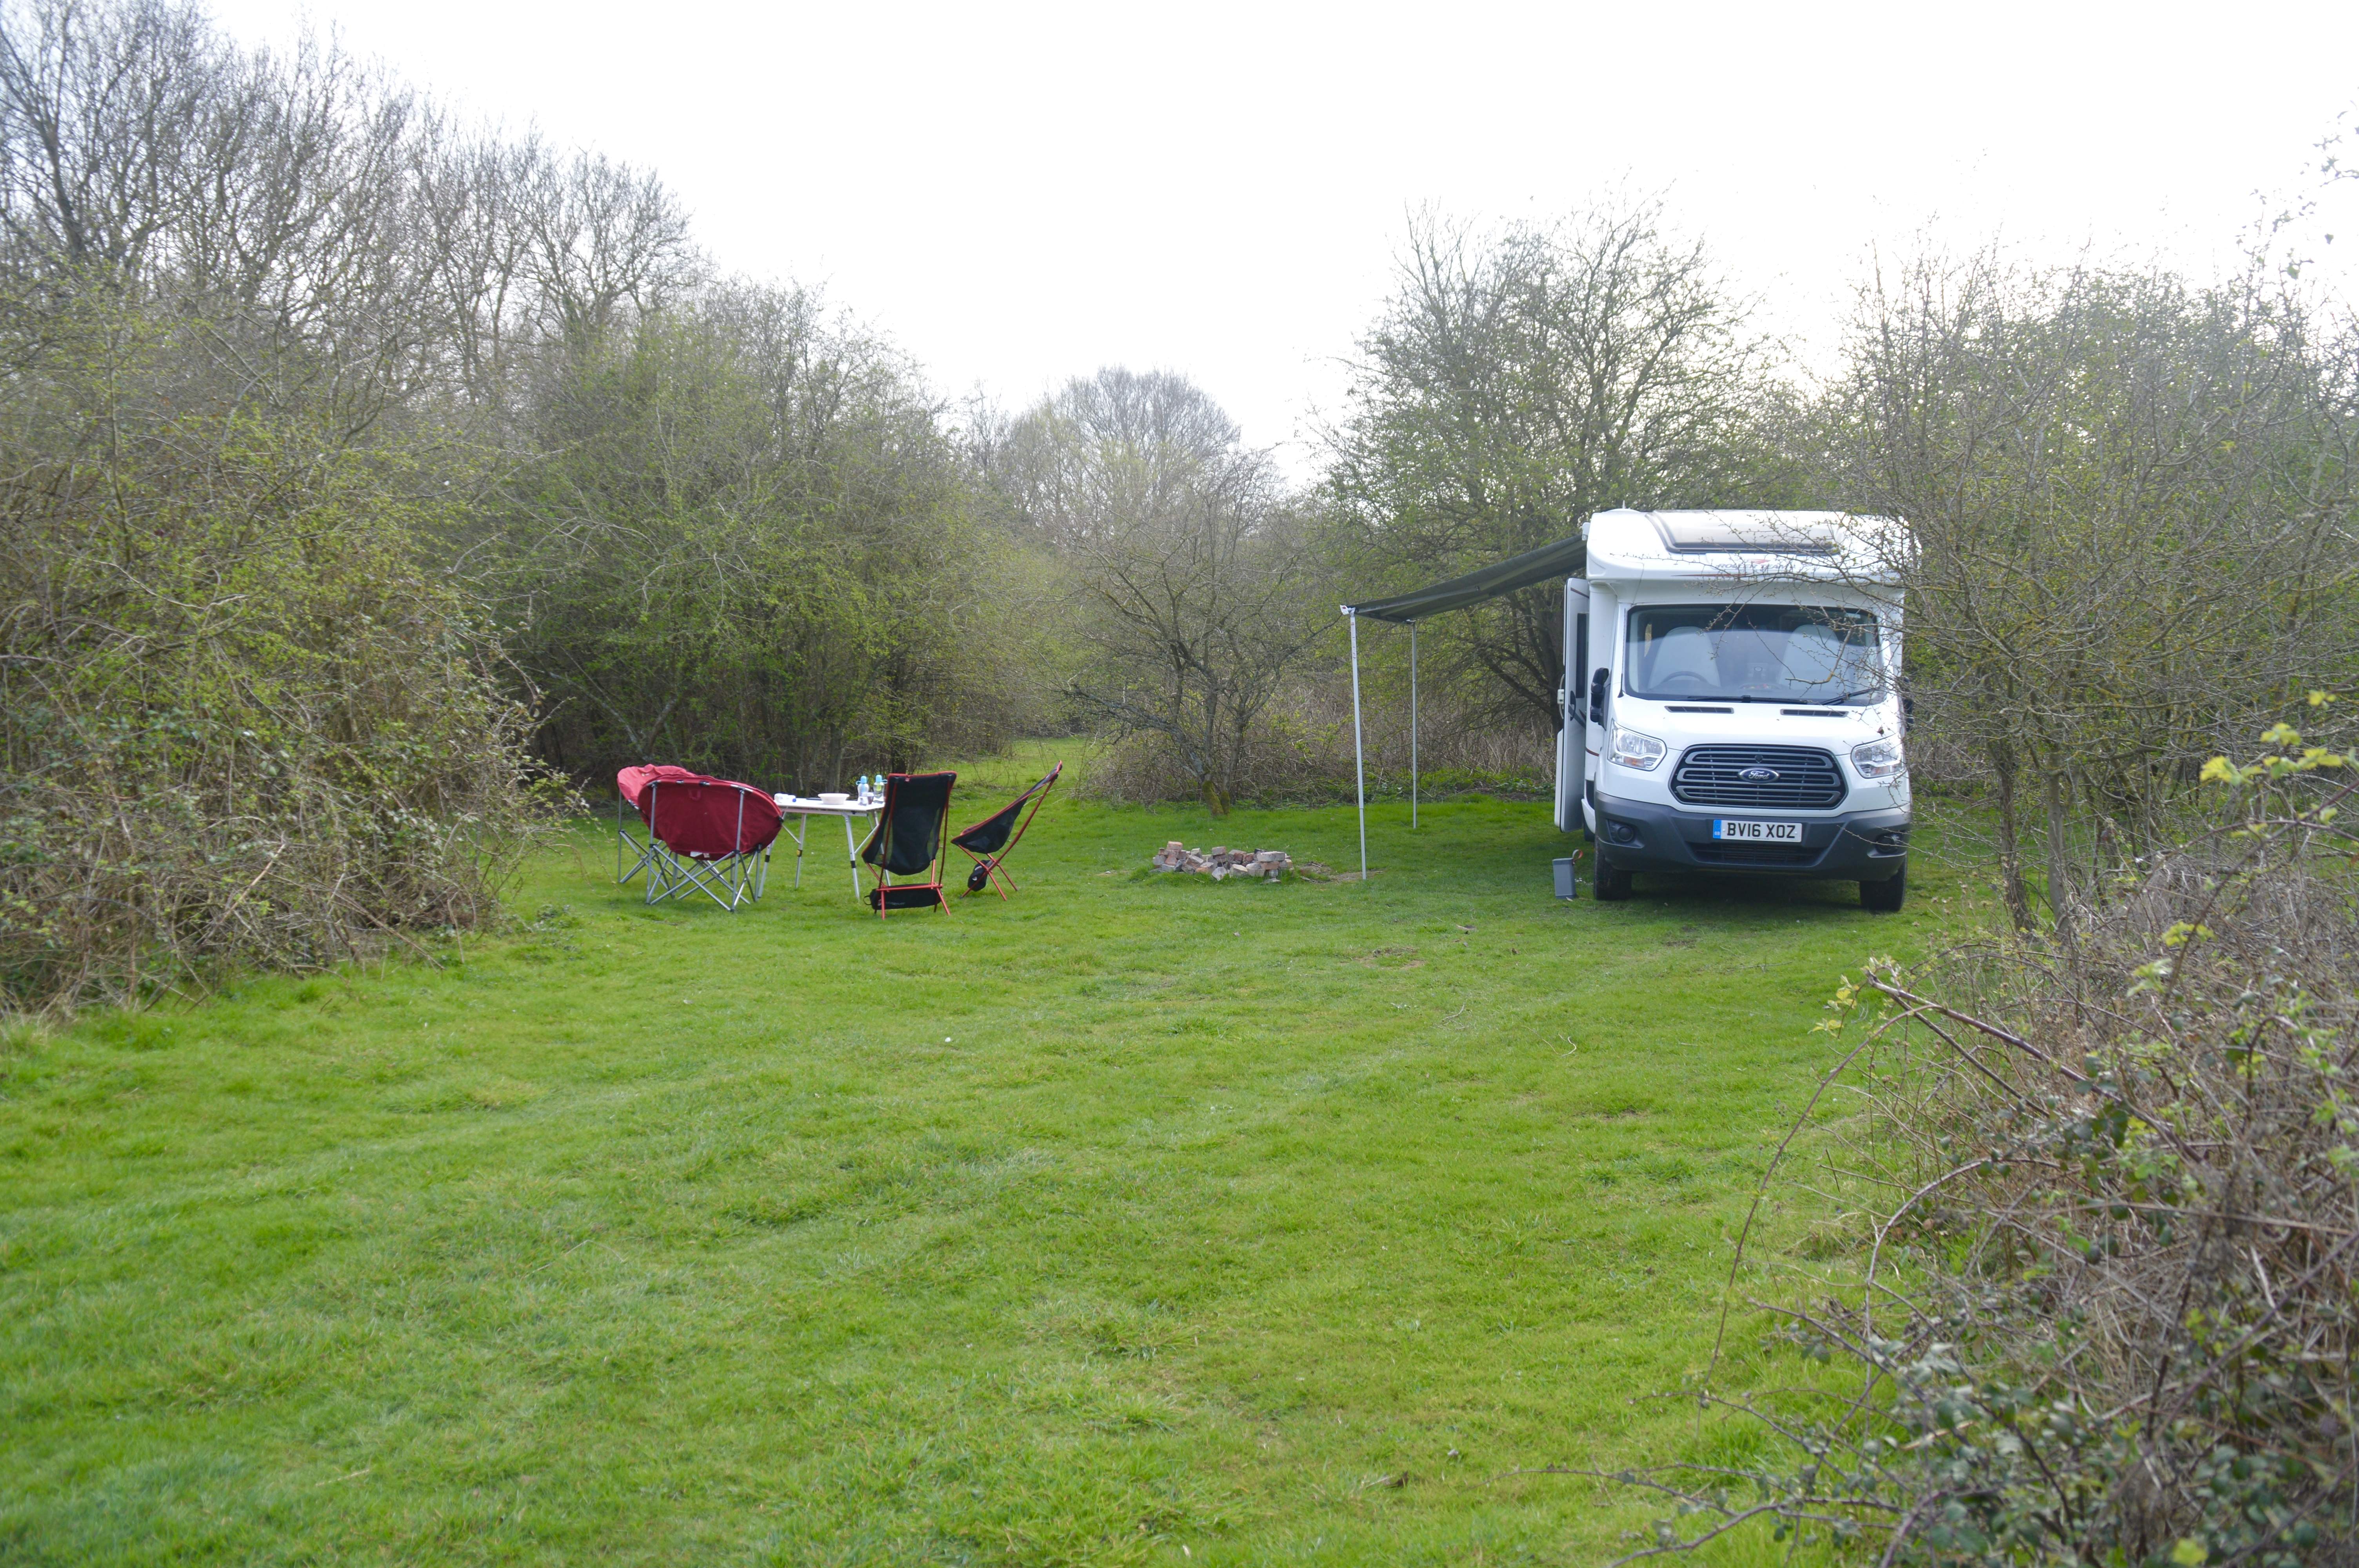 Our camping pitch at The Old Brickyard